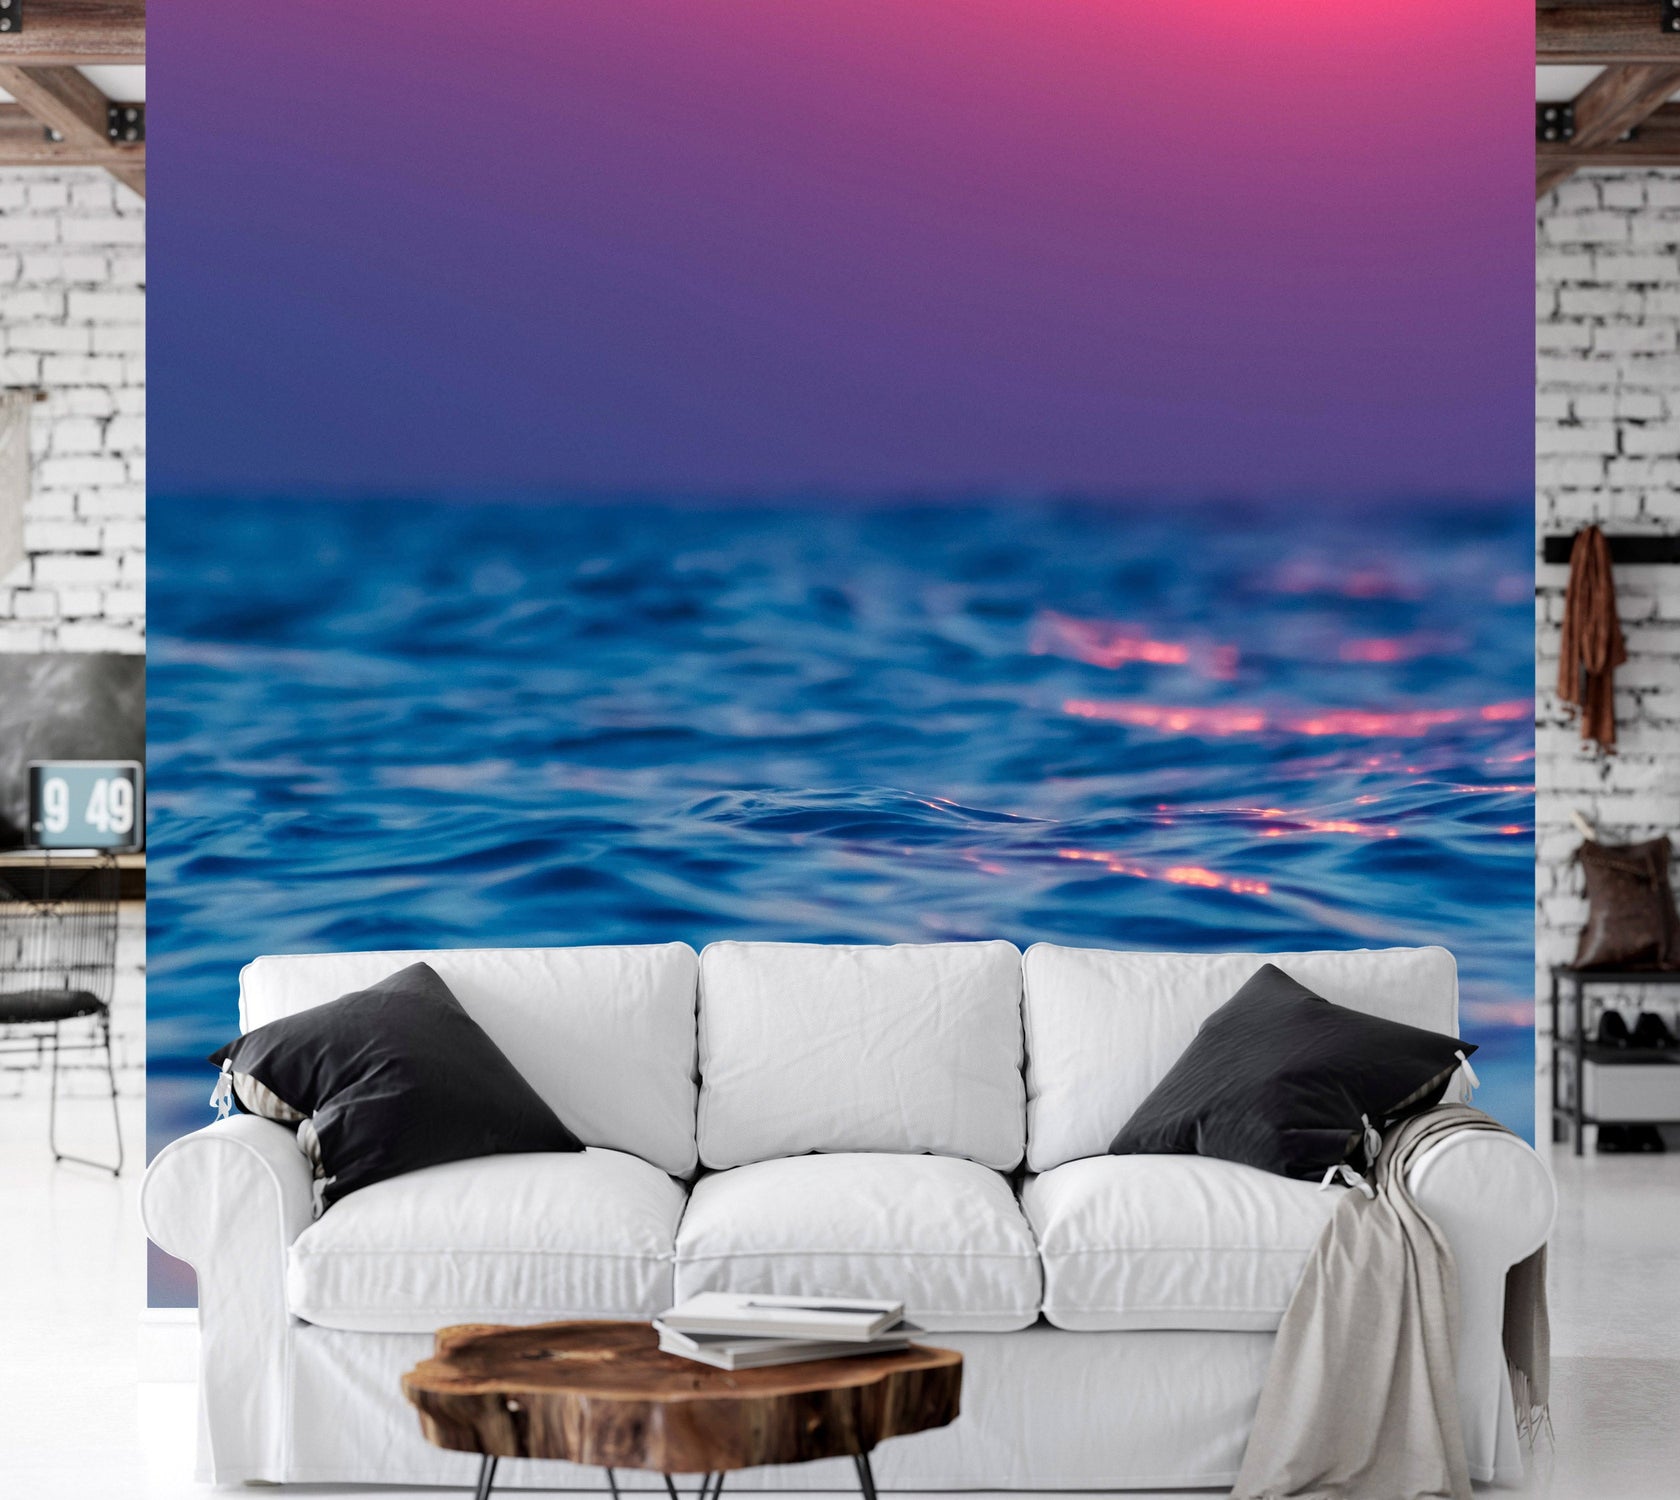 Peel & Stick Ocean Wall Mural - Vibrant Sea in Gradients - Removable Wall Decals-Tiptophomedecor